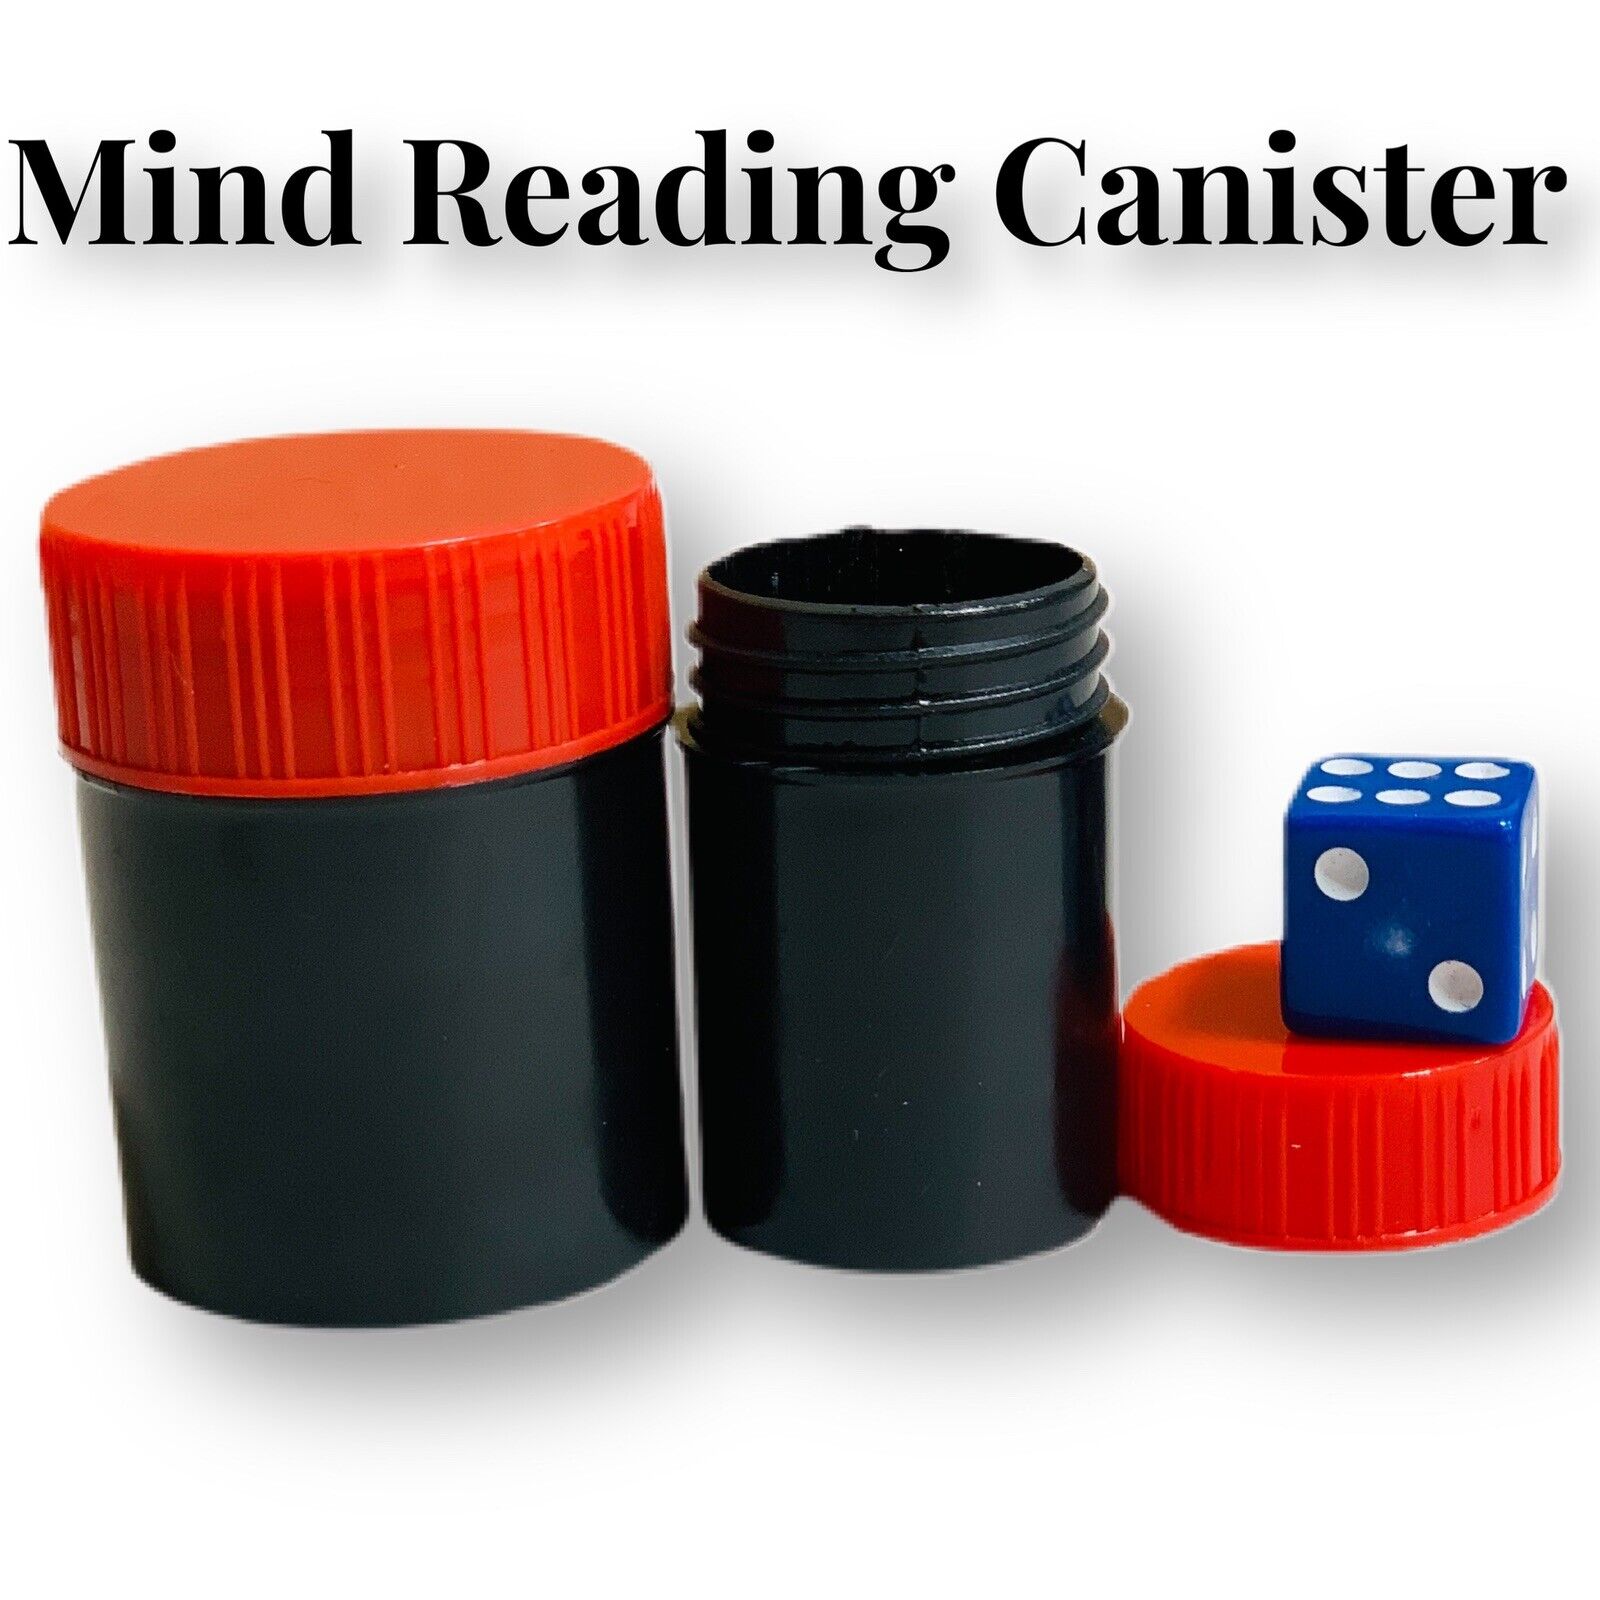 JUMBO Mind Reading Cannister Crazy Cube Dice Predict Name Thought Psychic Séance